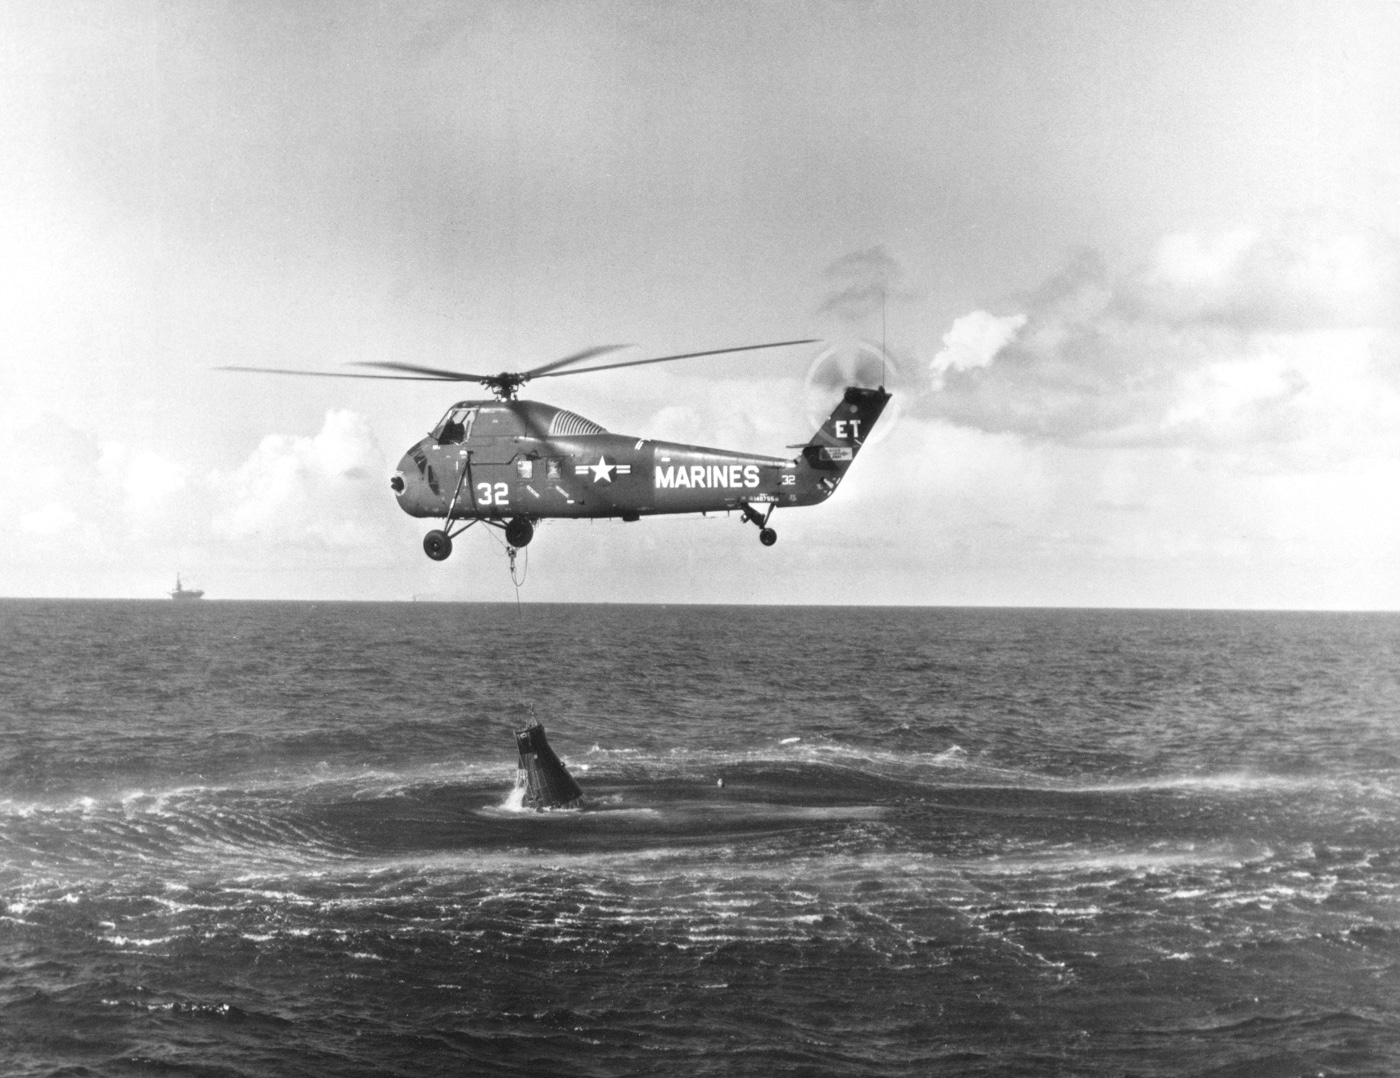 Shown is a US Marine helicopter attempting to life a NASA Mercury capsule from the Atlantic Ocean. An accident on the capsule ejected the hatch and caused seawater to pour into the compartment. Astronaut Gun Grissom was able to escape and was rescued before the capsule sunk to the bottom of the sea. 